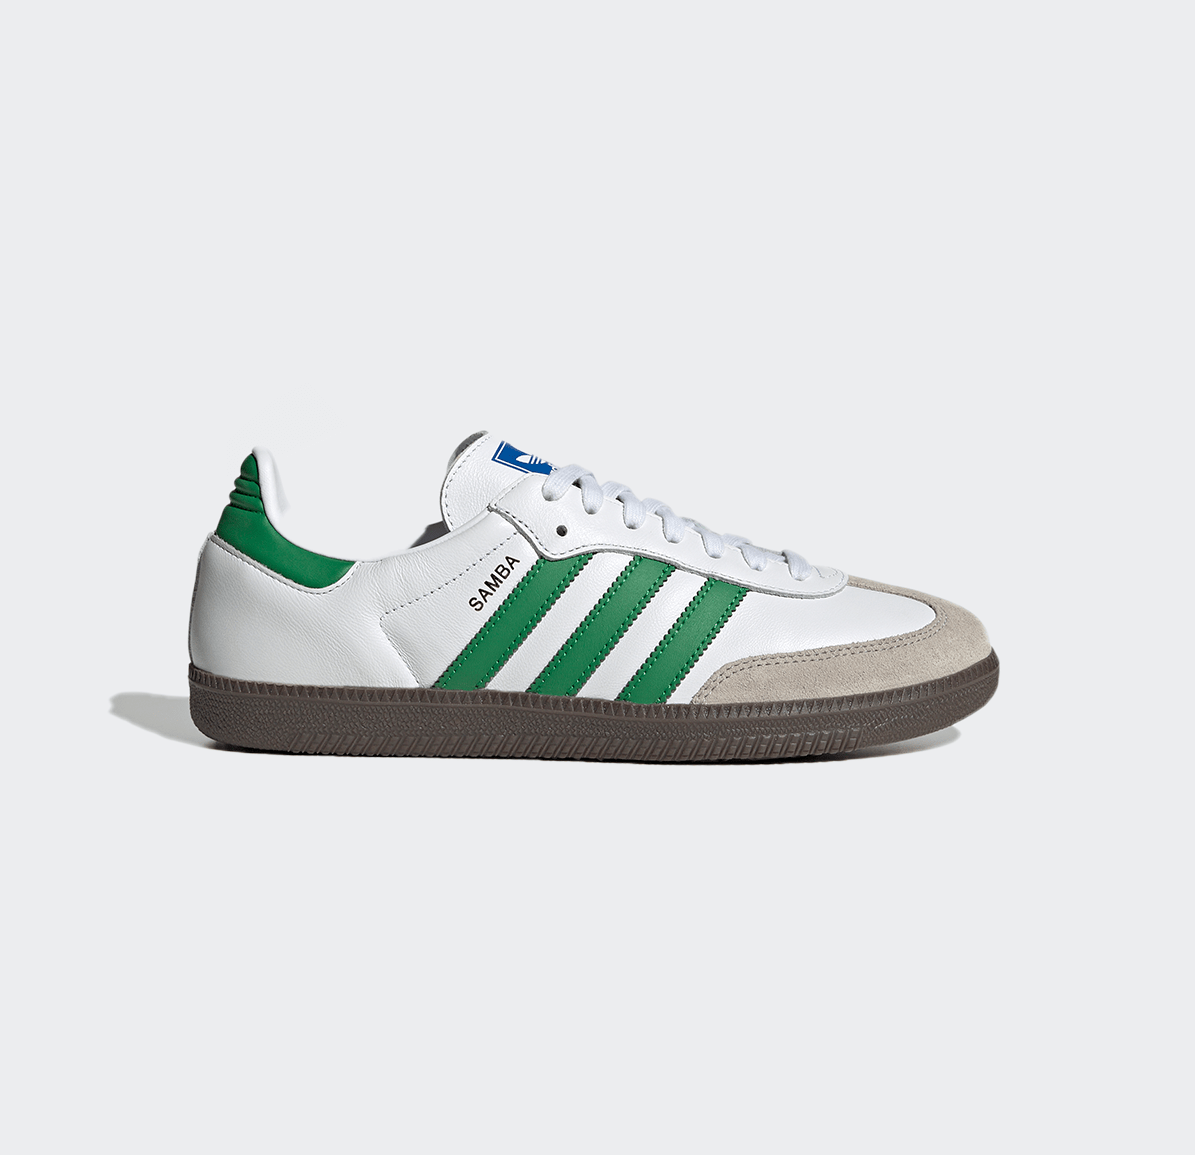 Adidas Samba OG -  Cloud White/Green/Supplier Colour - Adidas - State Of Play